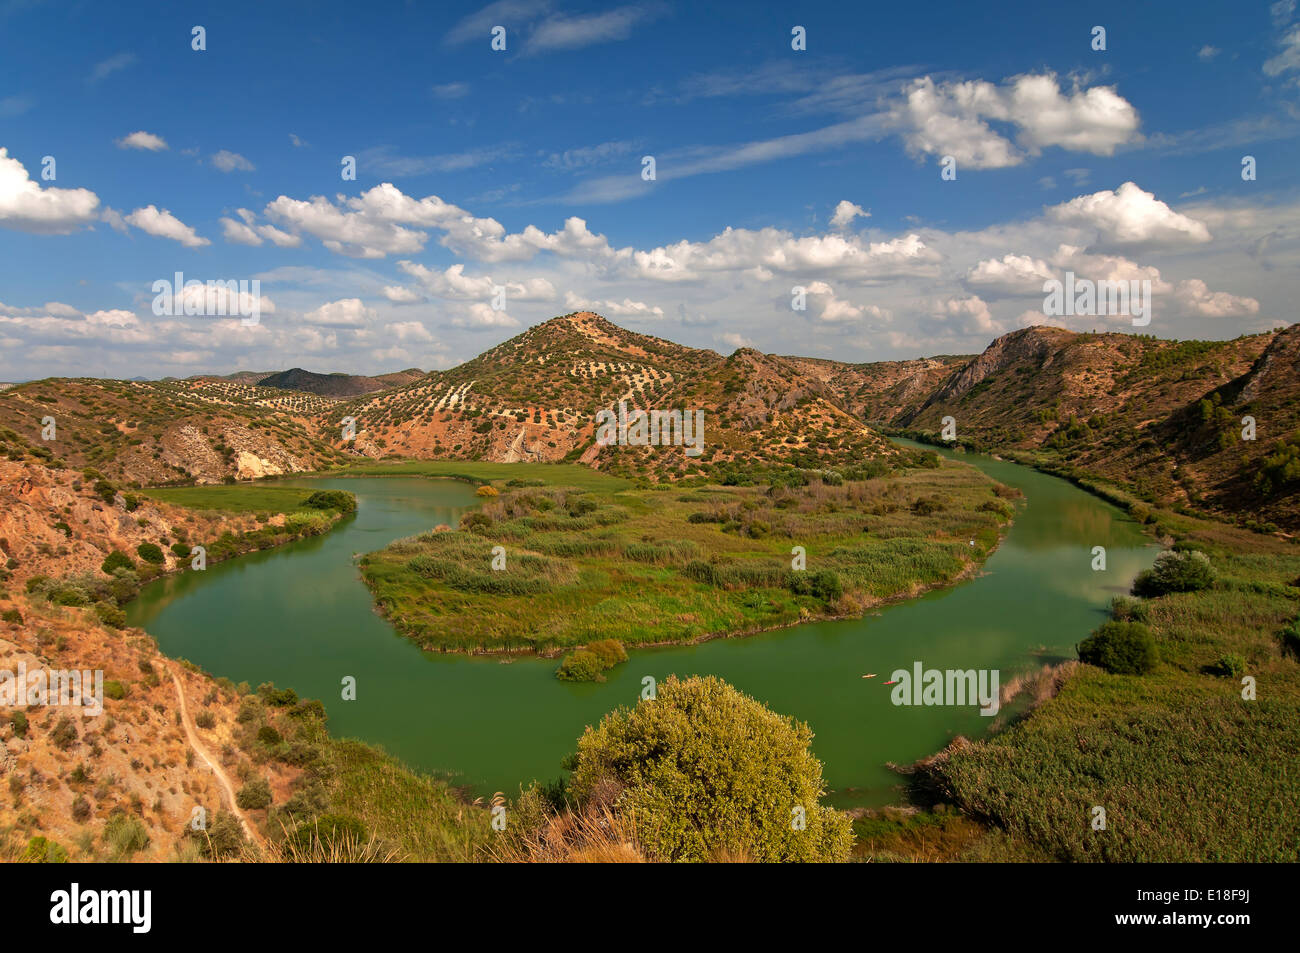 Meander on the Genil river, Badolatosa, Seville-province, Region of Andalusia, Spain, Europe Stock Photo